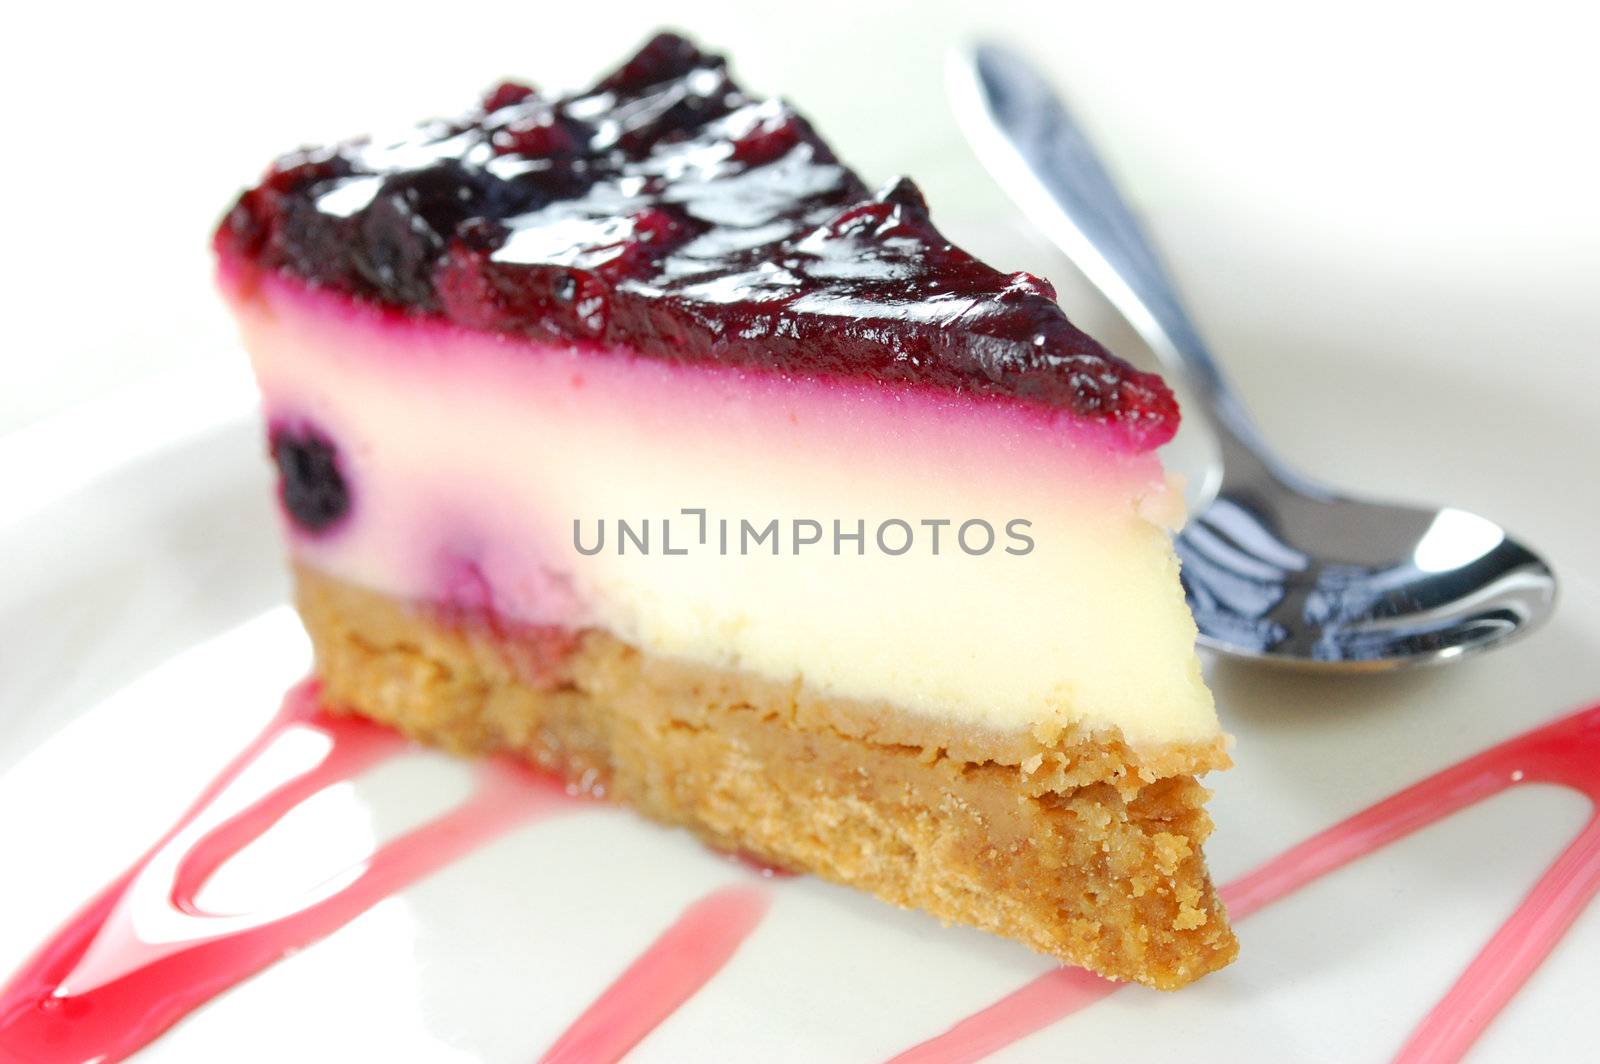 Berry topped cheesecake with strawberry syrup